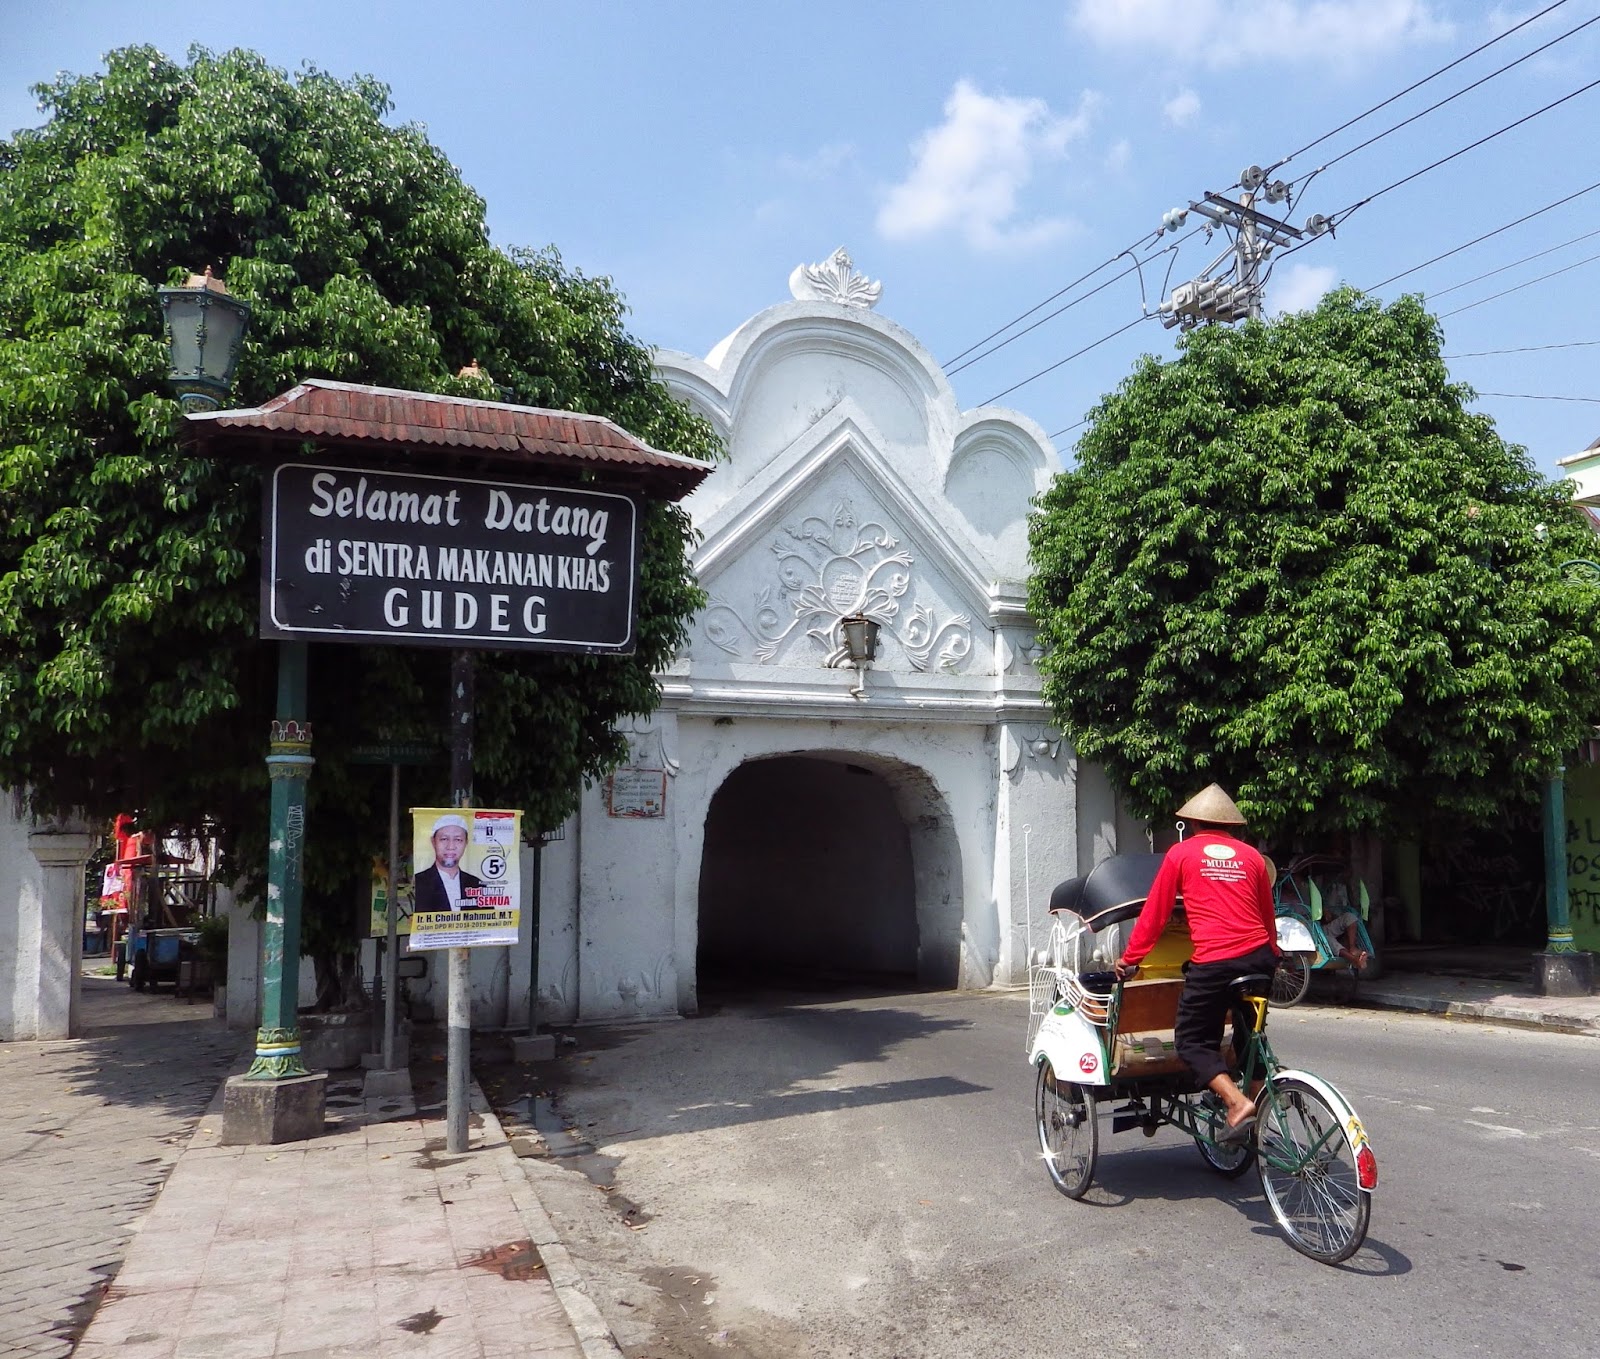 An entrance to the Kraton, the walled city of Yogjakarta